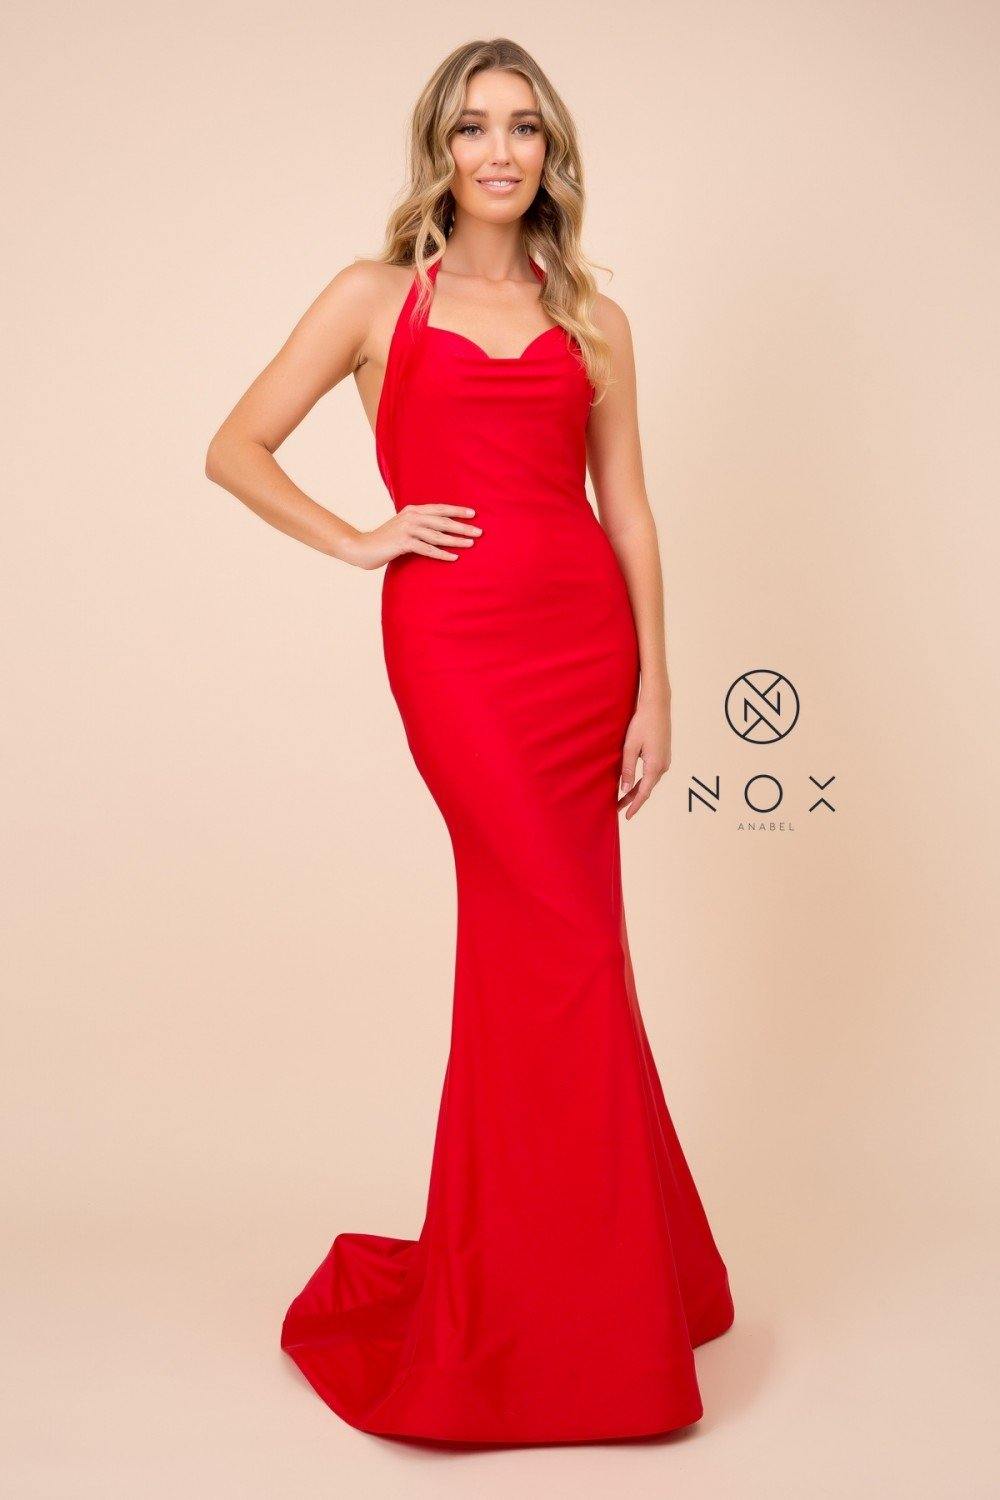 Long Formal Halter Mermaid Evening Prom Dress - The Dress Outlet Nox Anabel